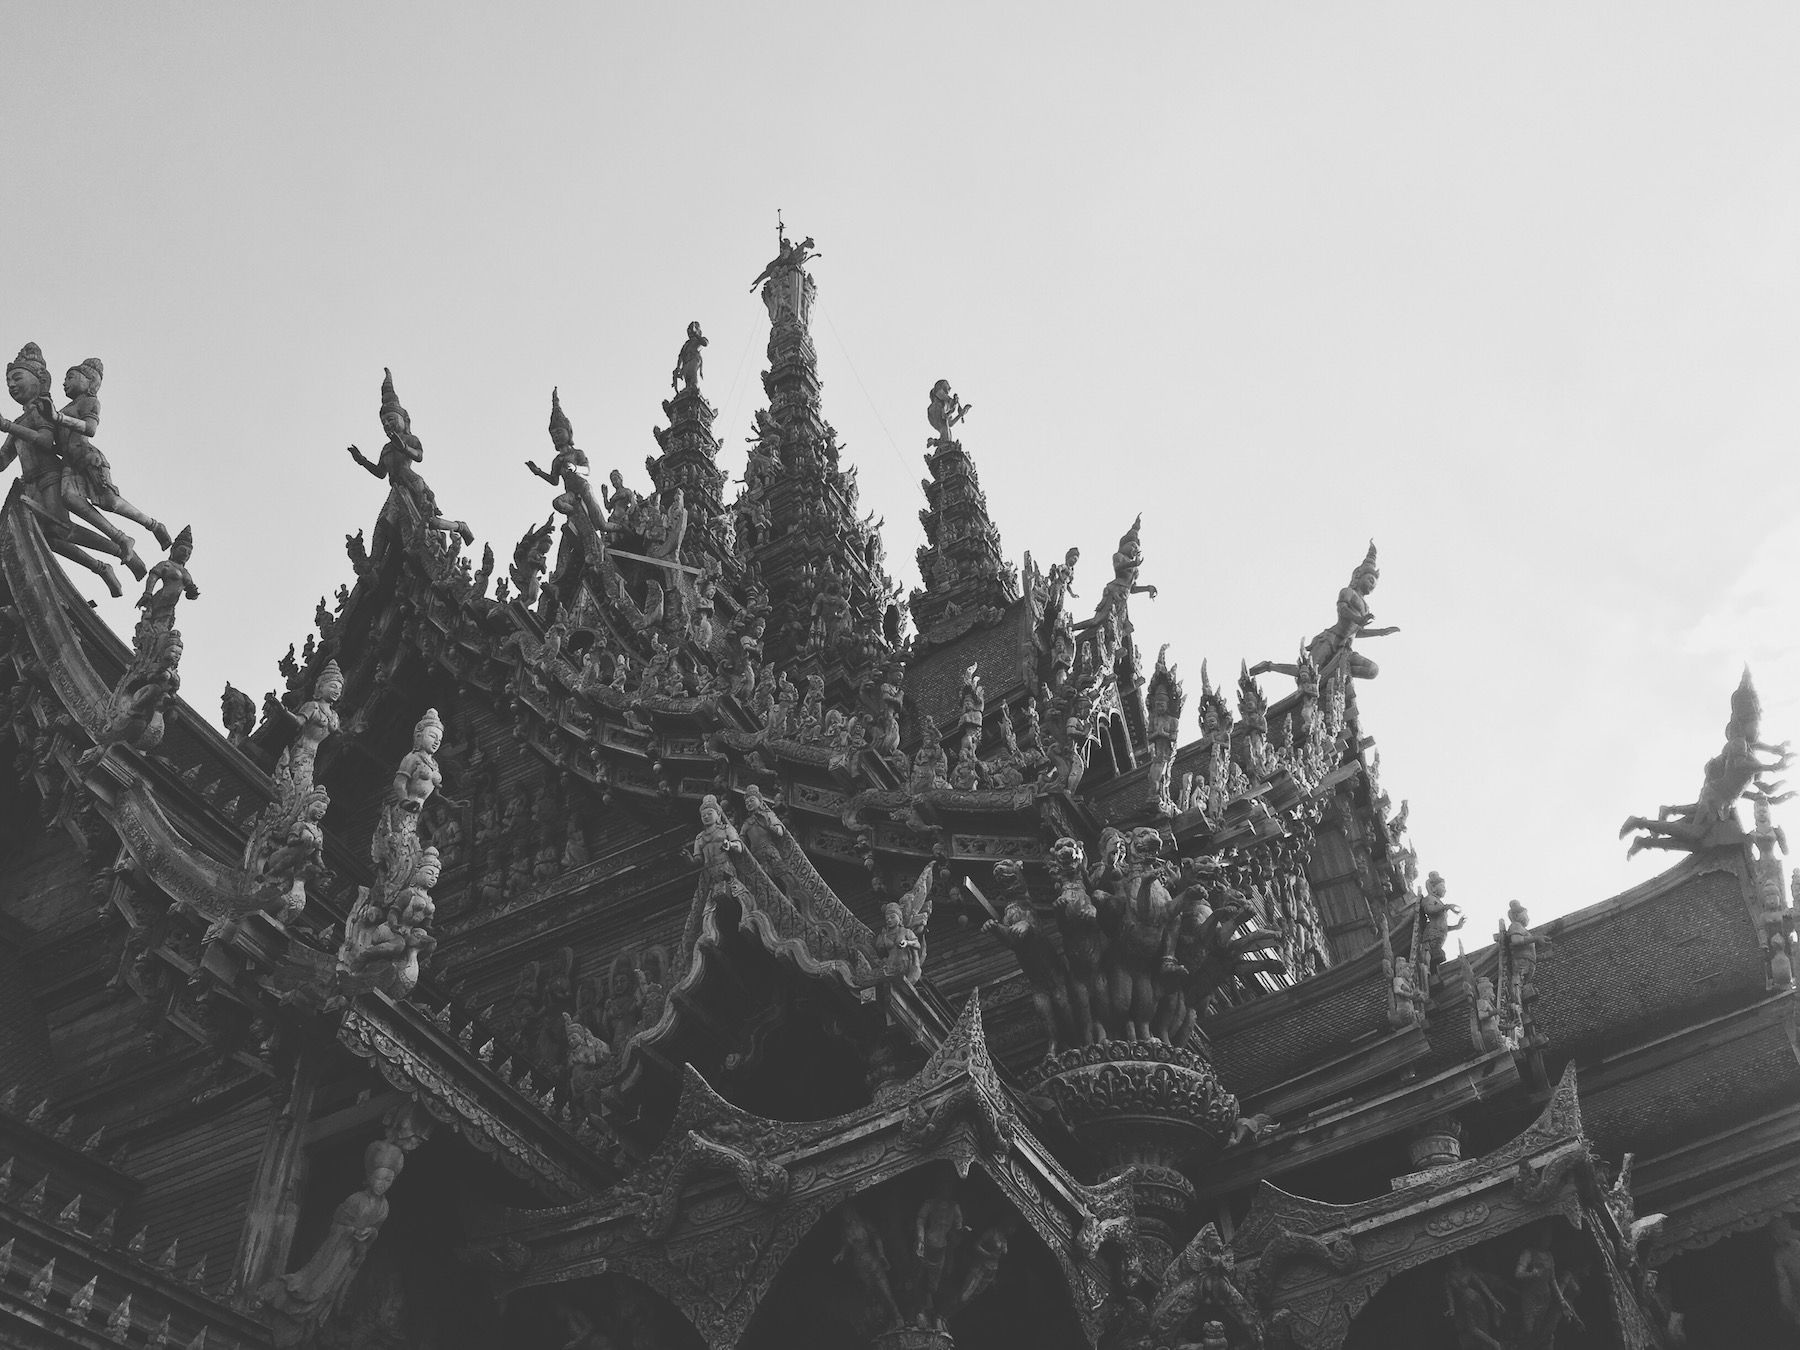 Black and white, looking up at statued spires atop the roofs of the Sanctuary of Truth